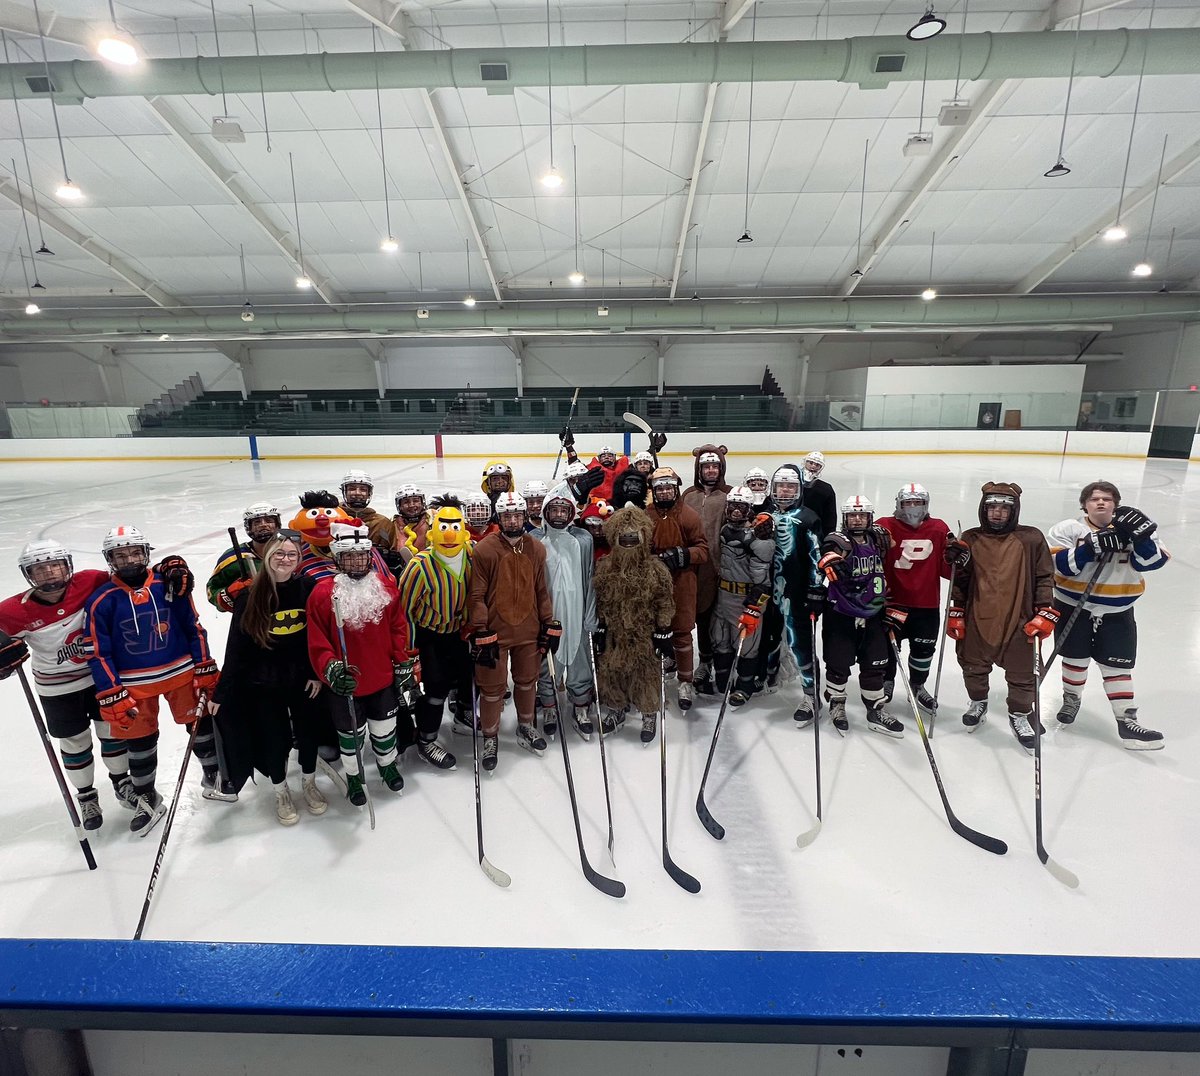 Last captain’s skate before tryouts and the seniors planned a little costume skake. #paduahockey #family #letsgetstarted